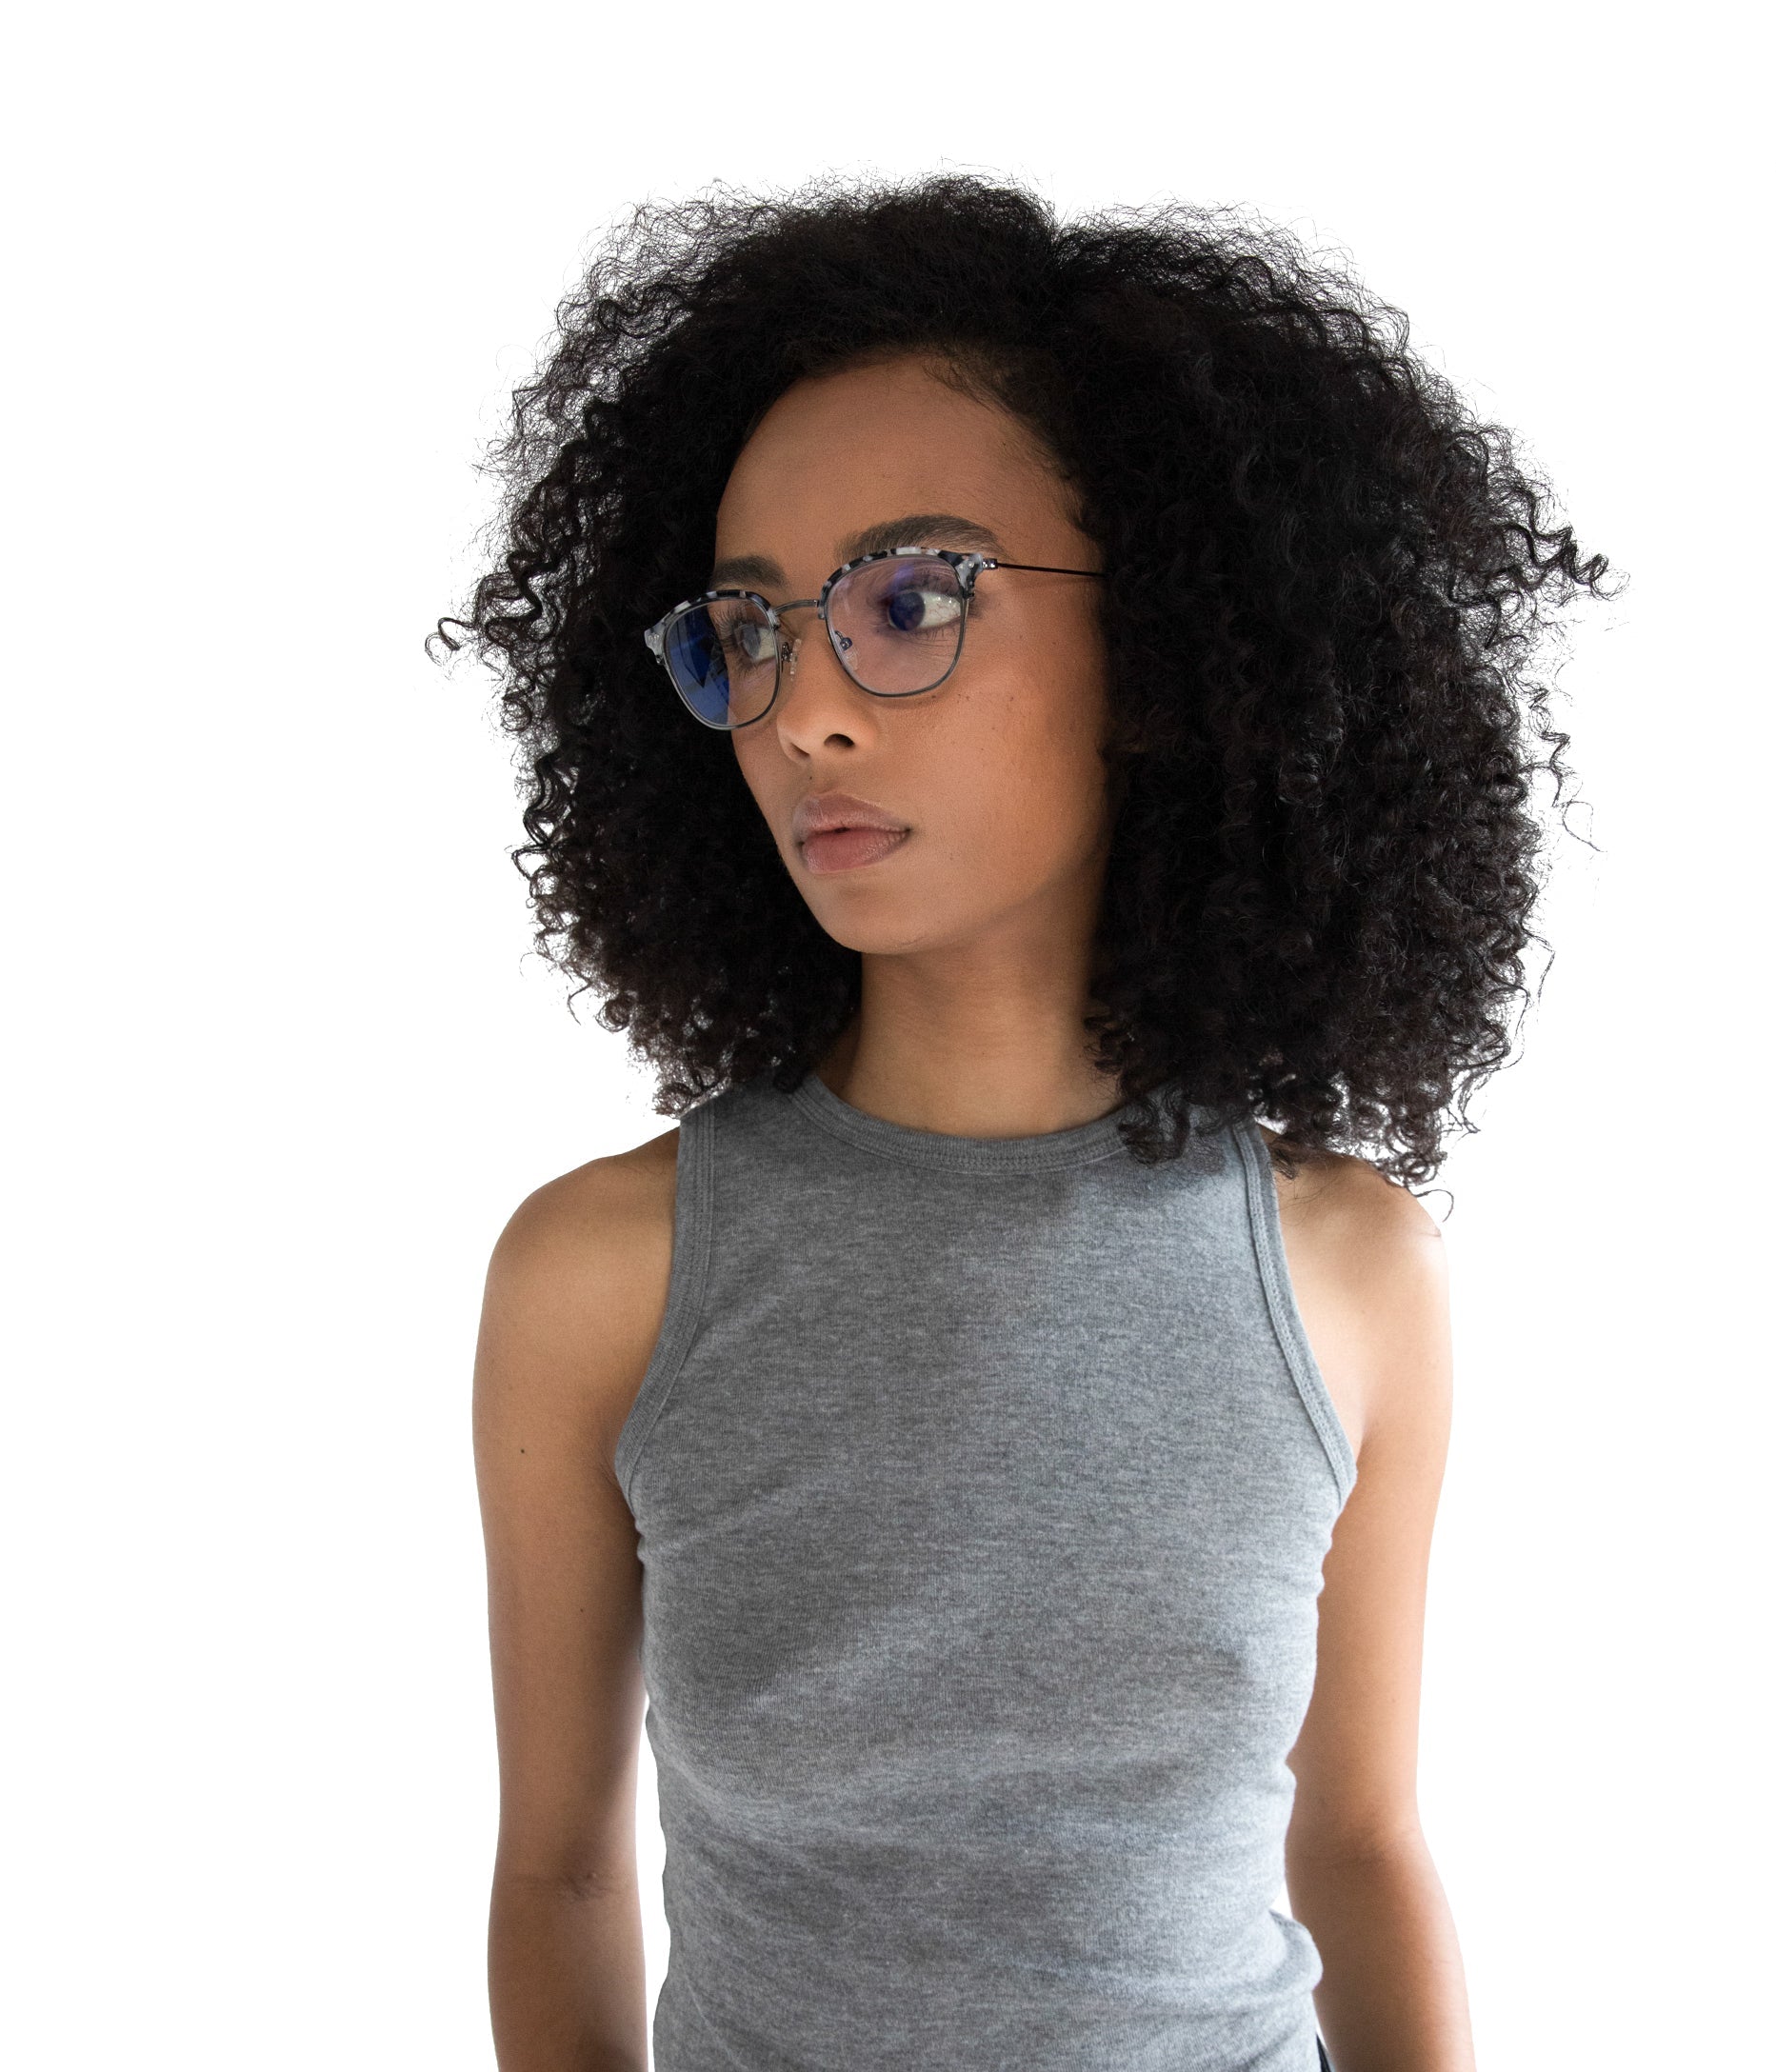 KANNA-3 Recycled Clubmaster Reading Glasses | Color: Grey - variant::gunmetal